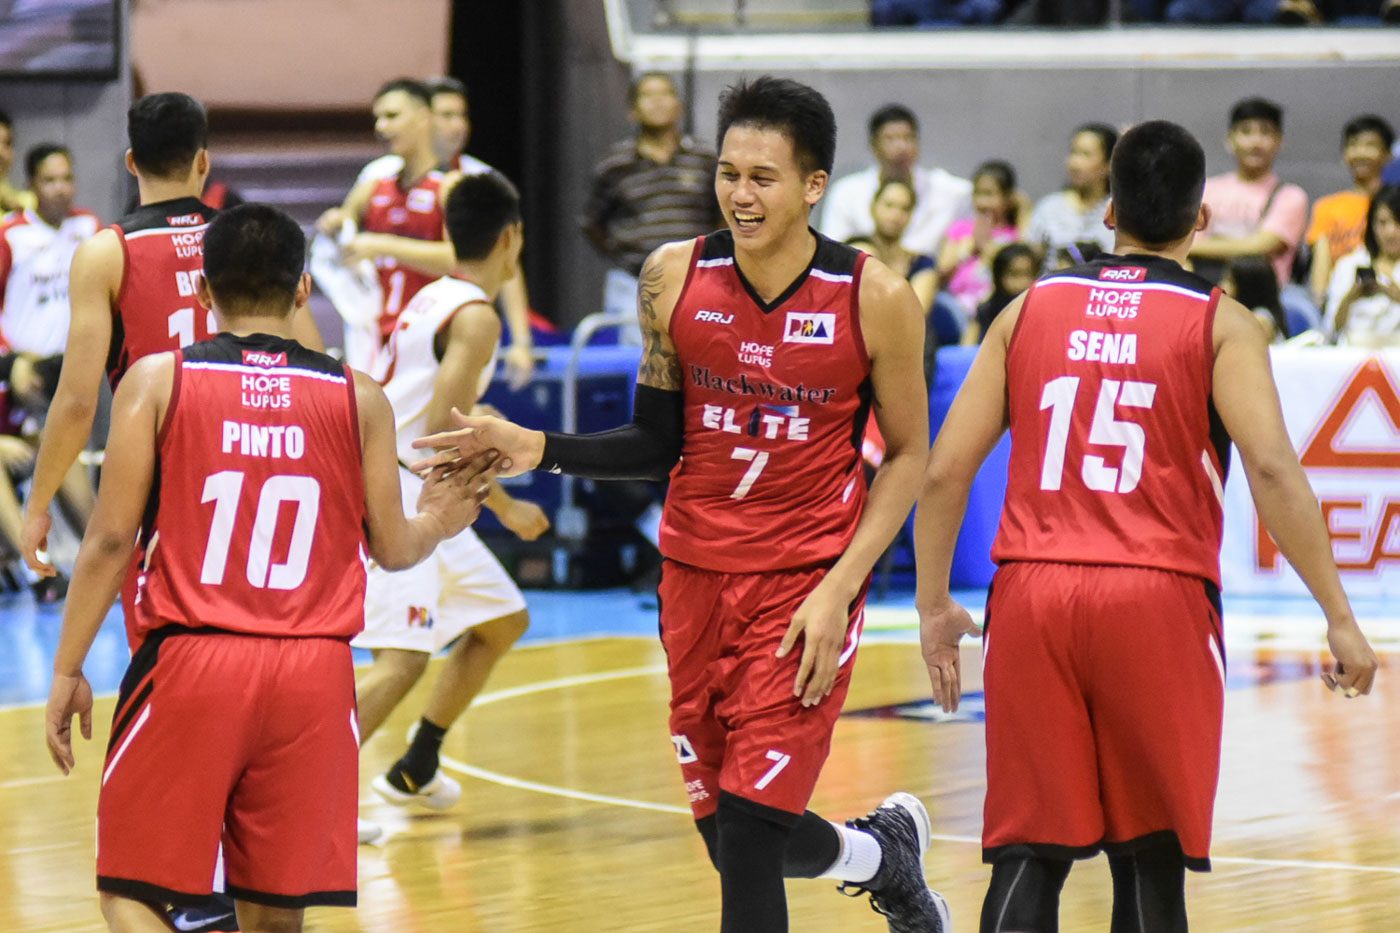 Blackwater’s playoff fate ‘is in our hands’ – Mike Digregorio